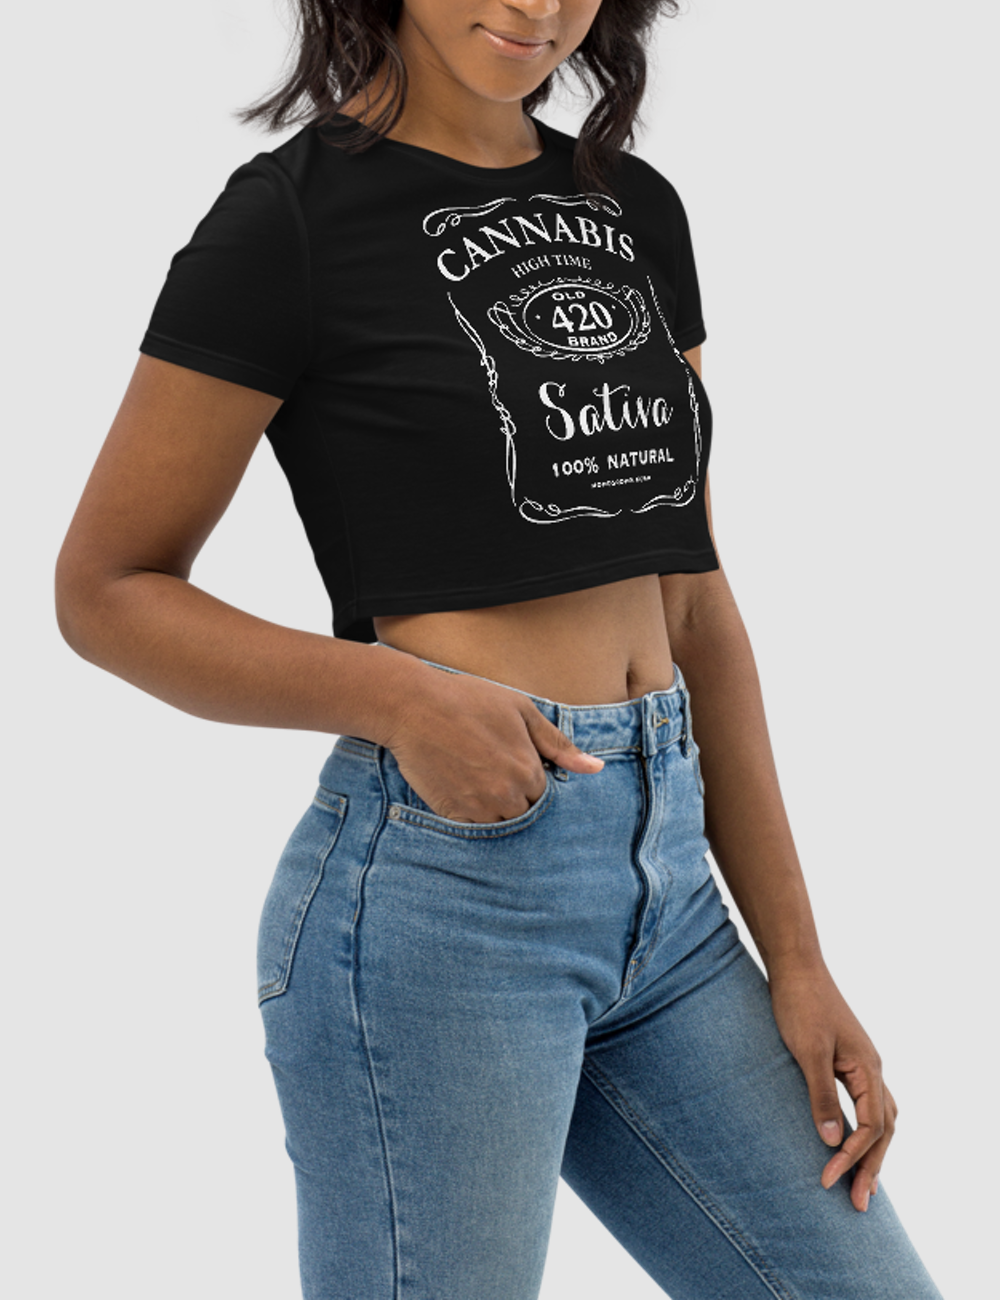 Cannabis 420 Whiskey Style Women's Fitted Crop Top T-Shirt OniTakai